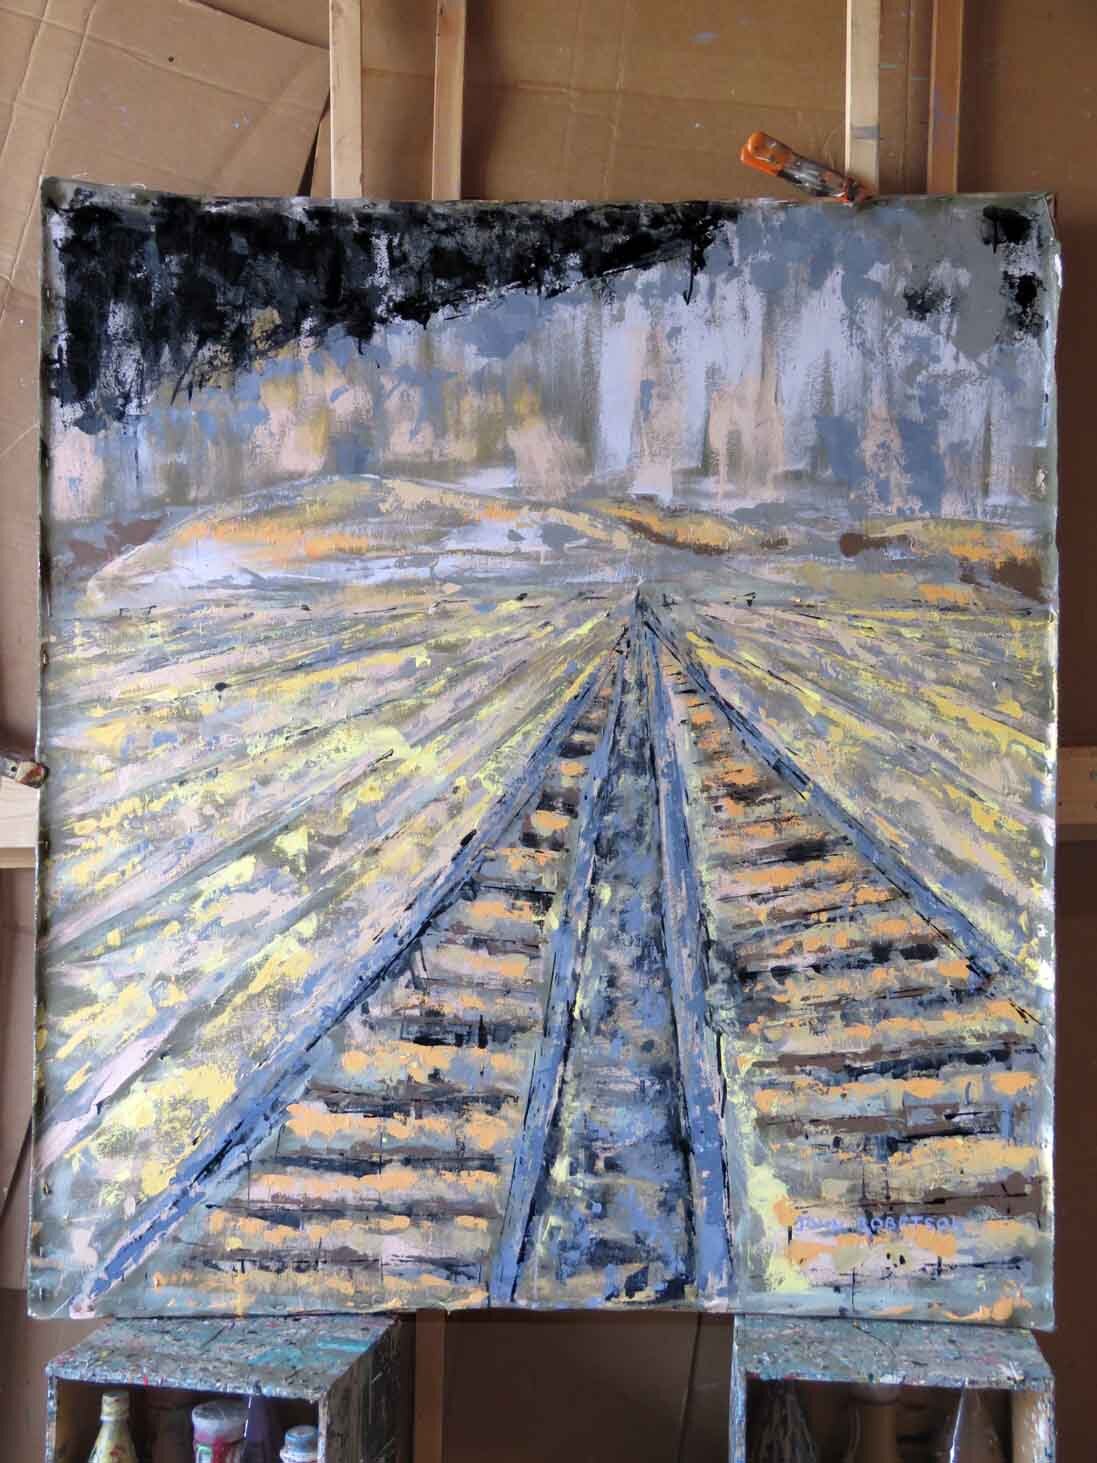 RR Yard 4 ft by 5 ft acrylic on unstretched canvas